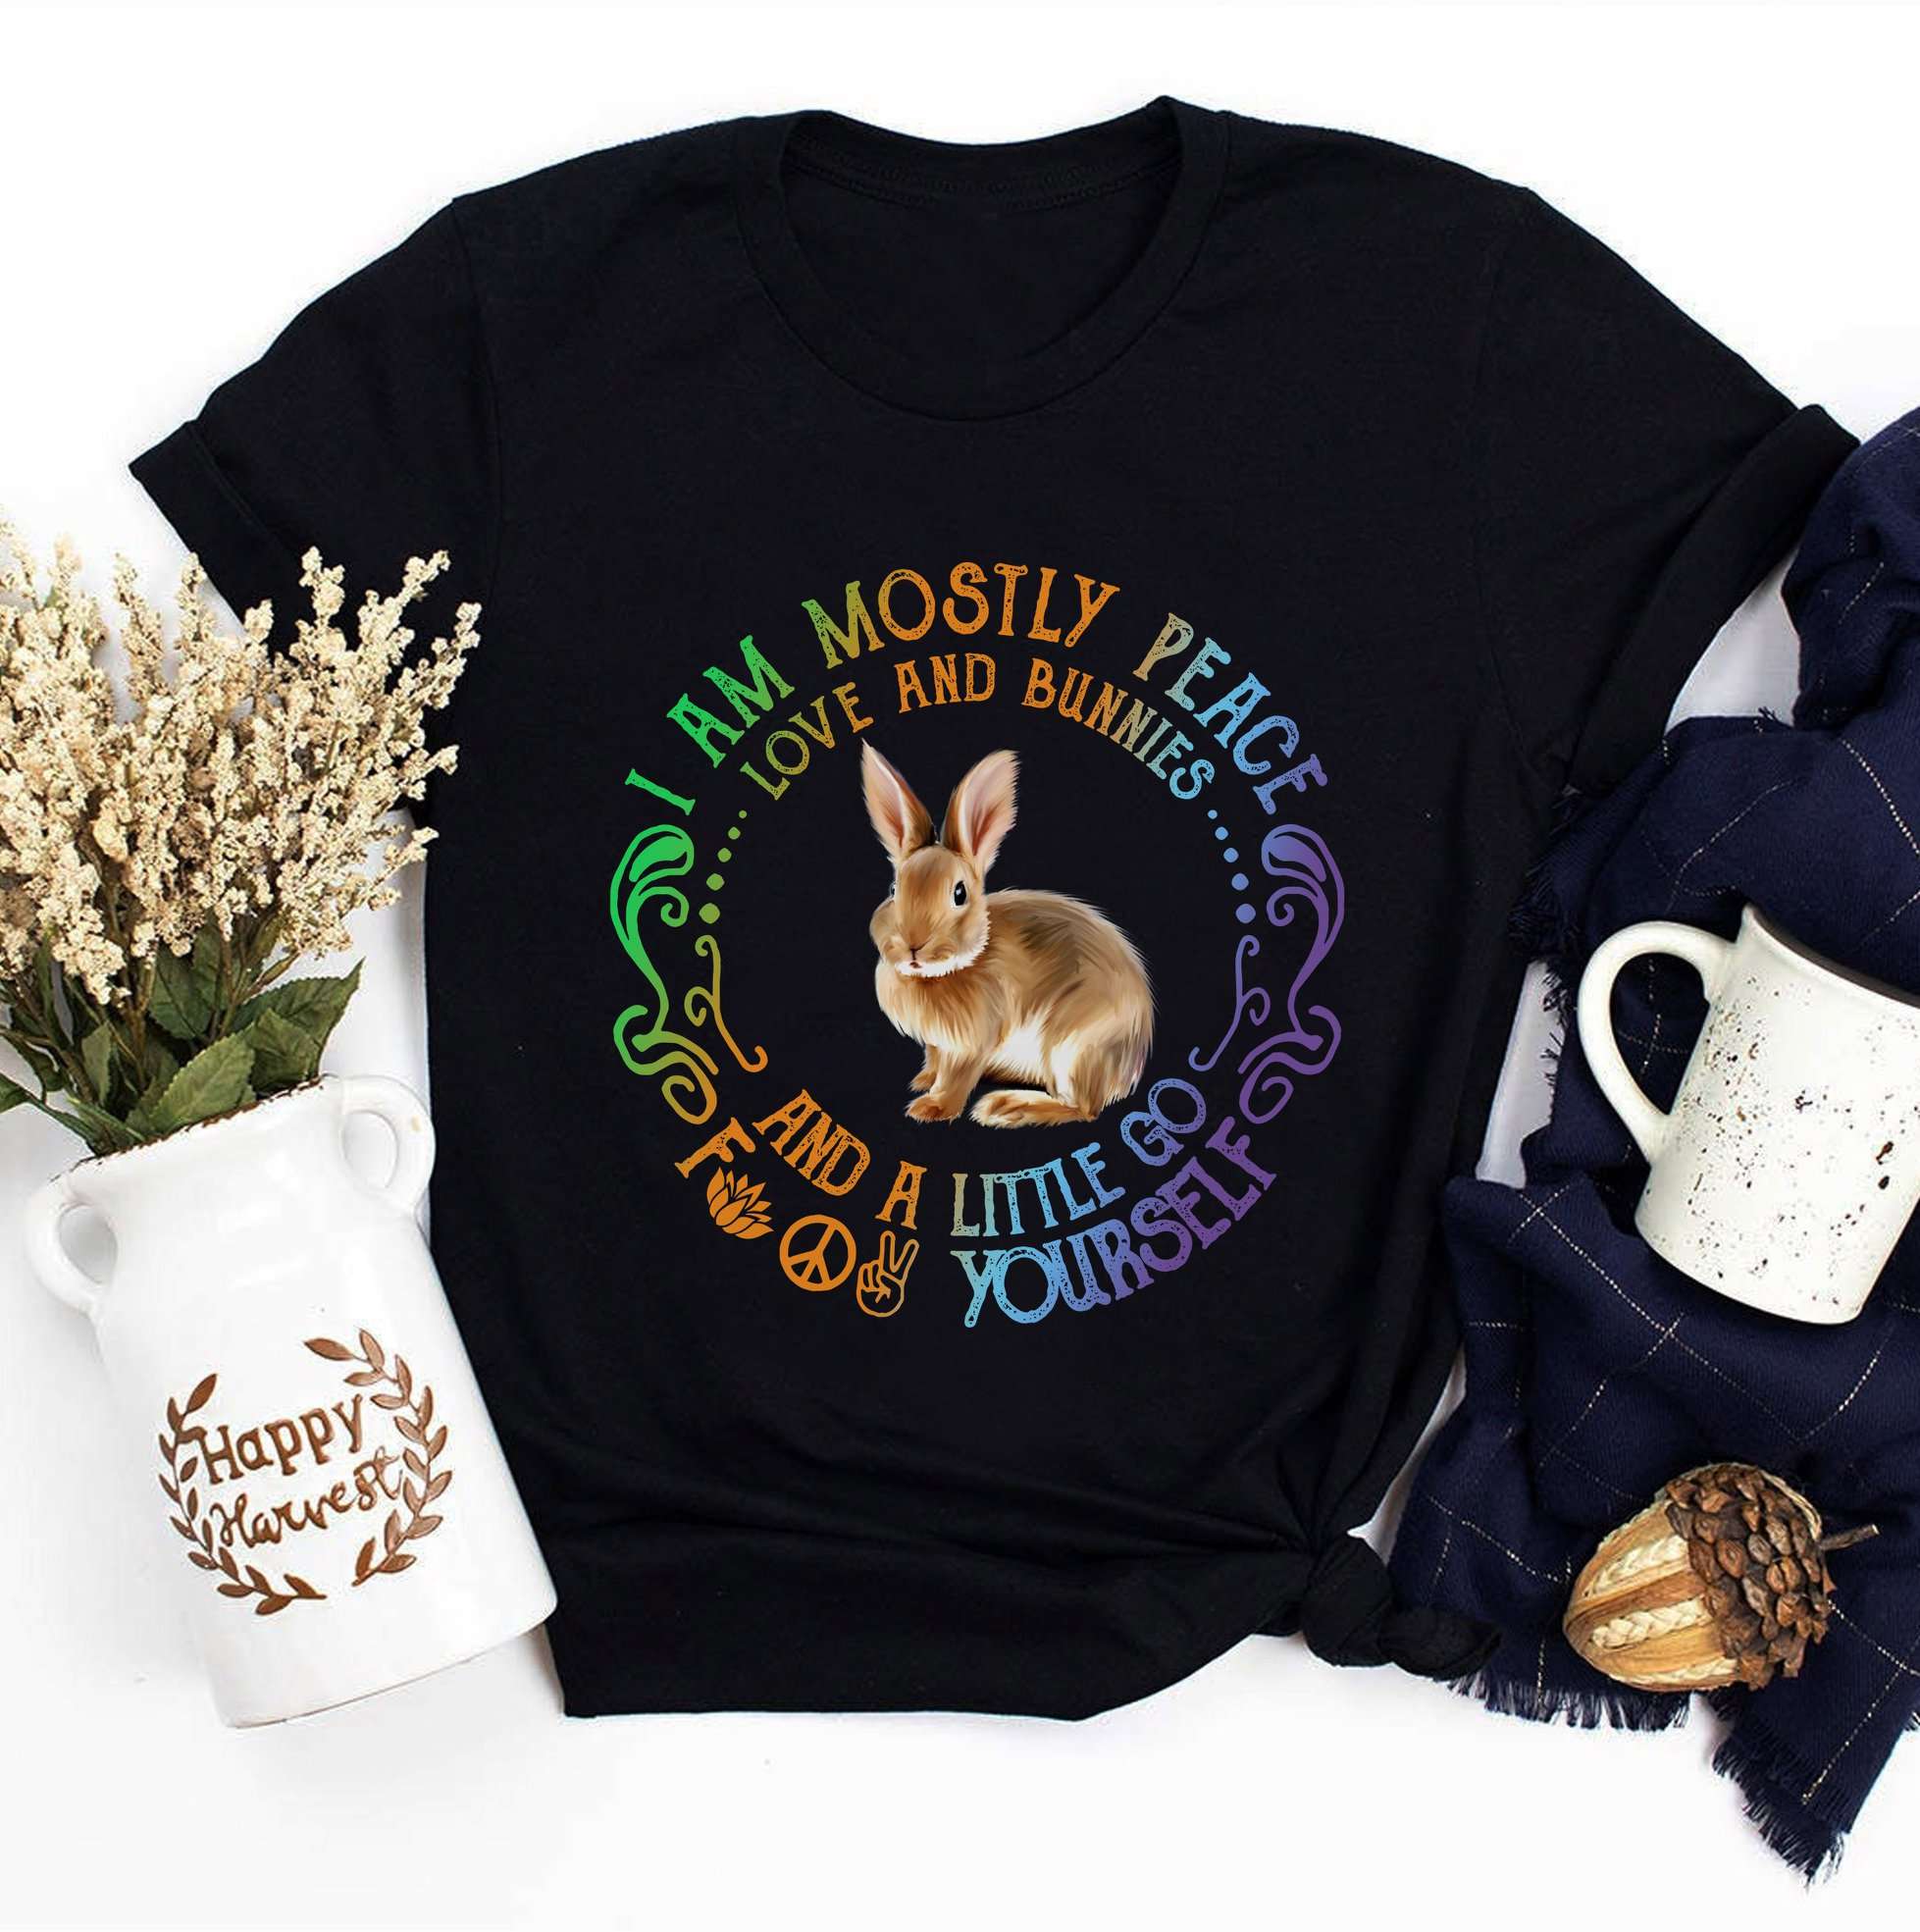 I am mostly peace love and bunnies and a little go fuck yourself - Bunnies animal lover